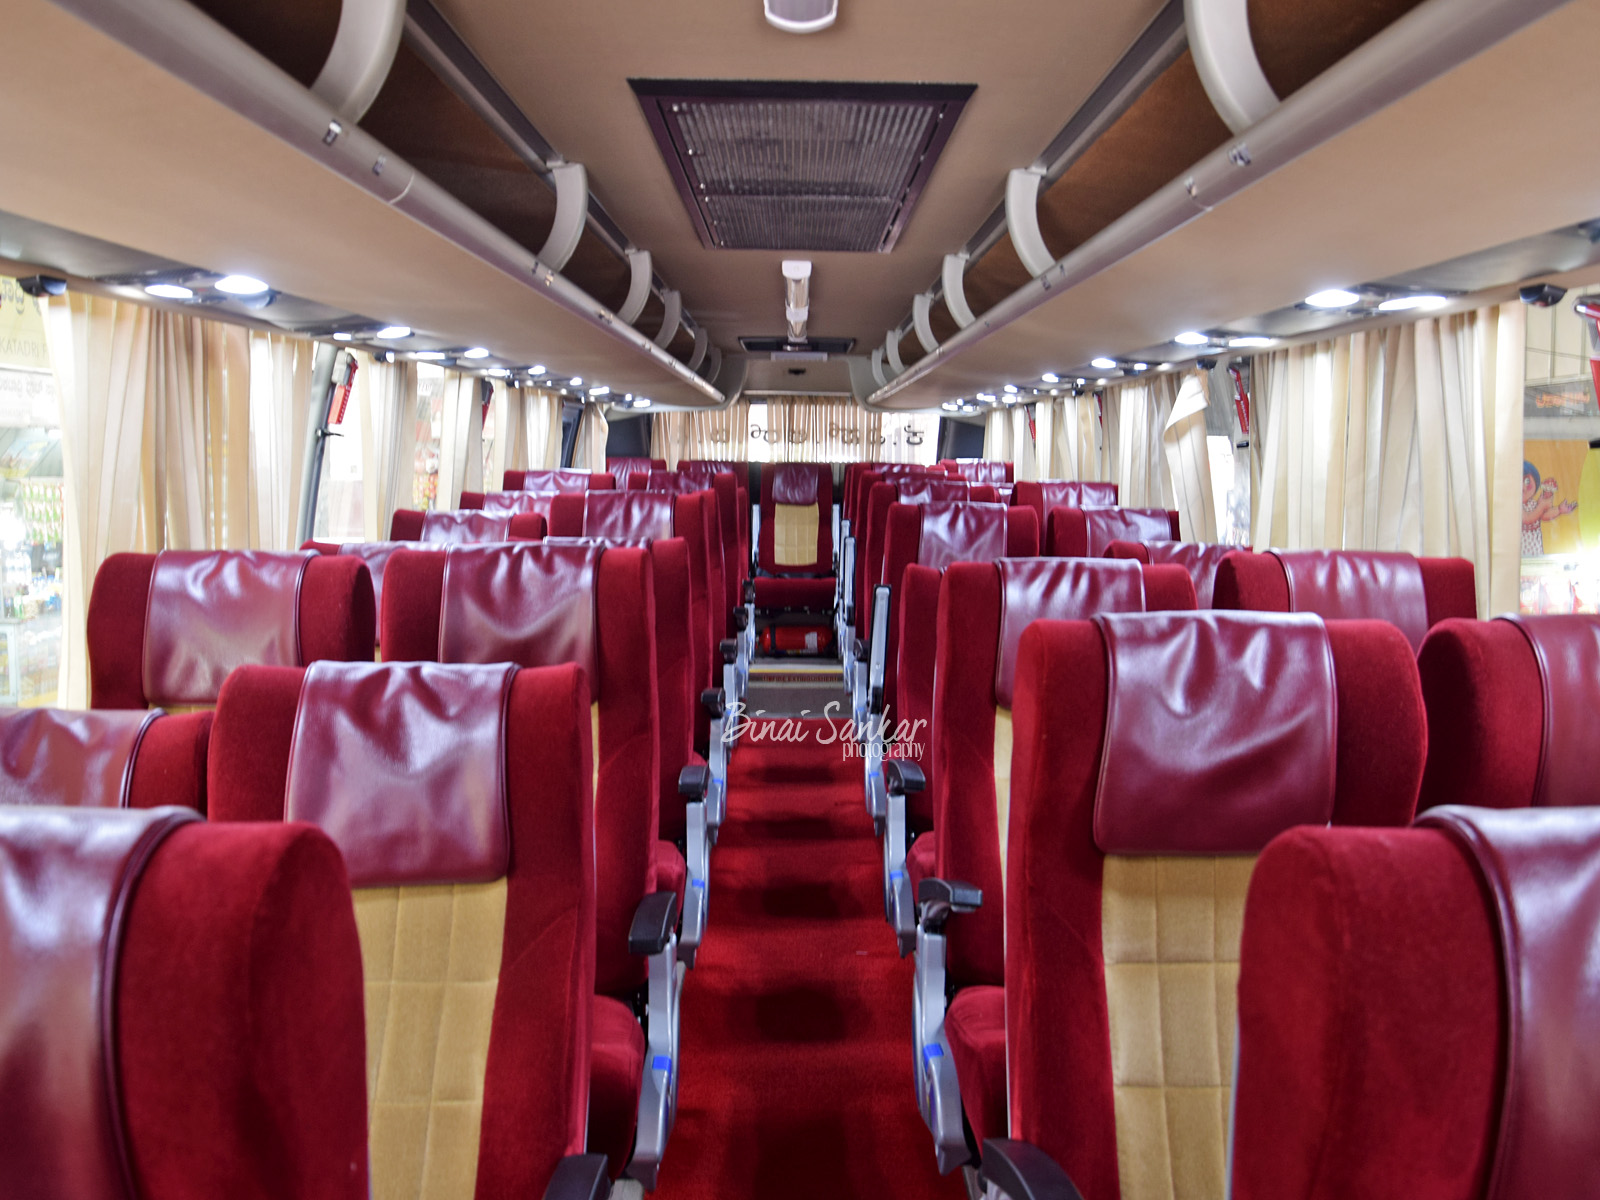 Covid effect: KSRTC modifies seating alignment | Bengaluru News - Times of  India